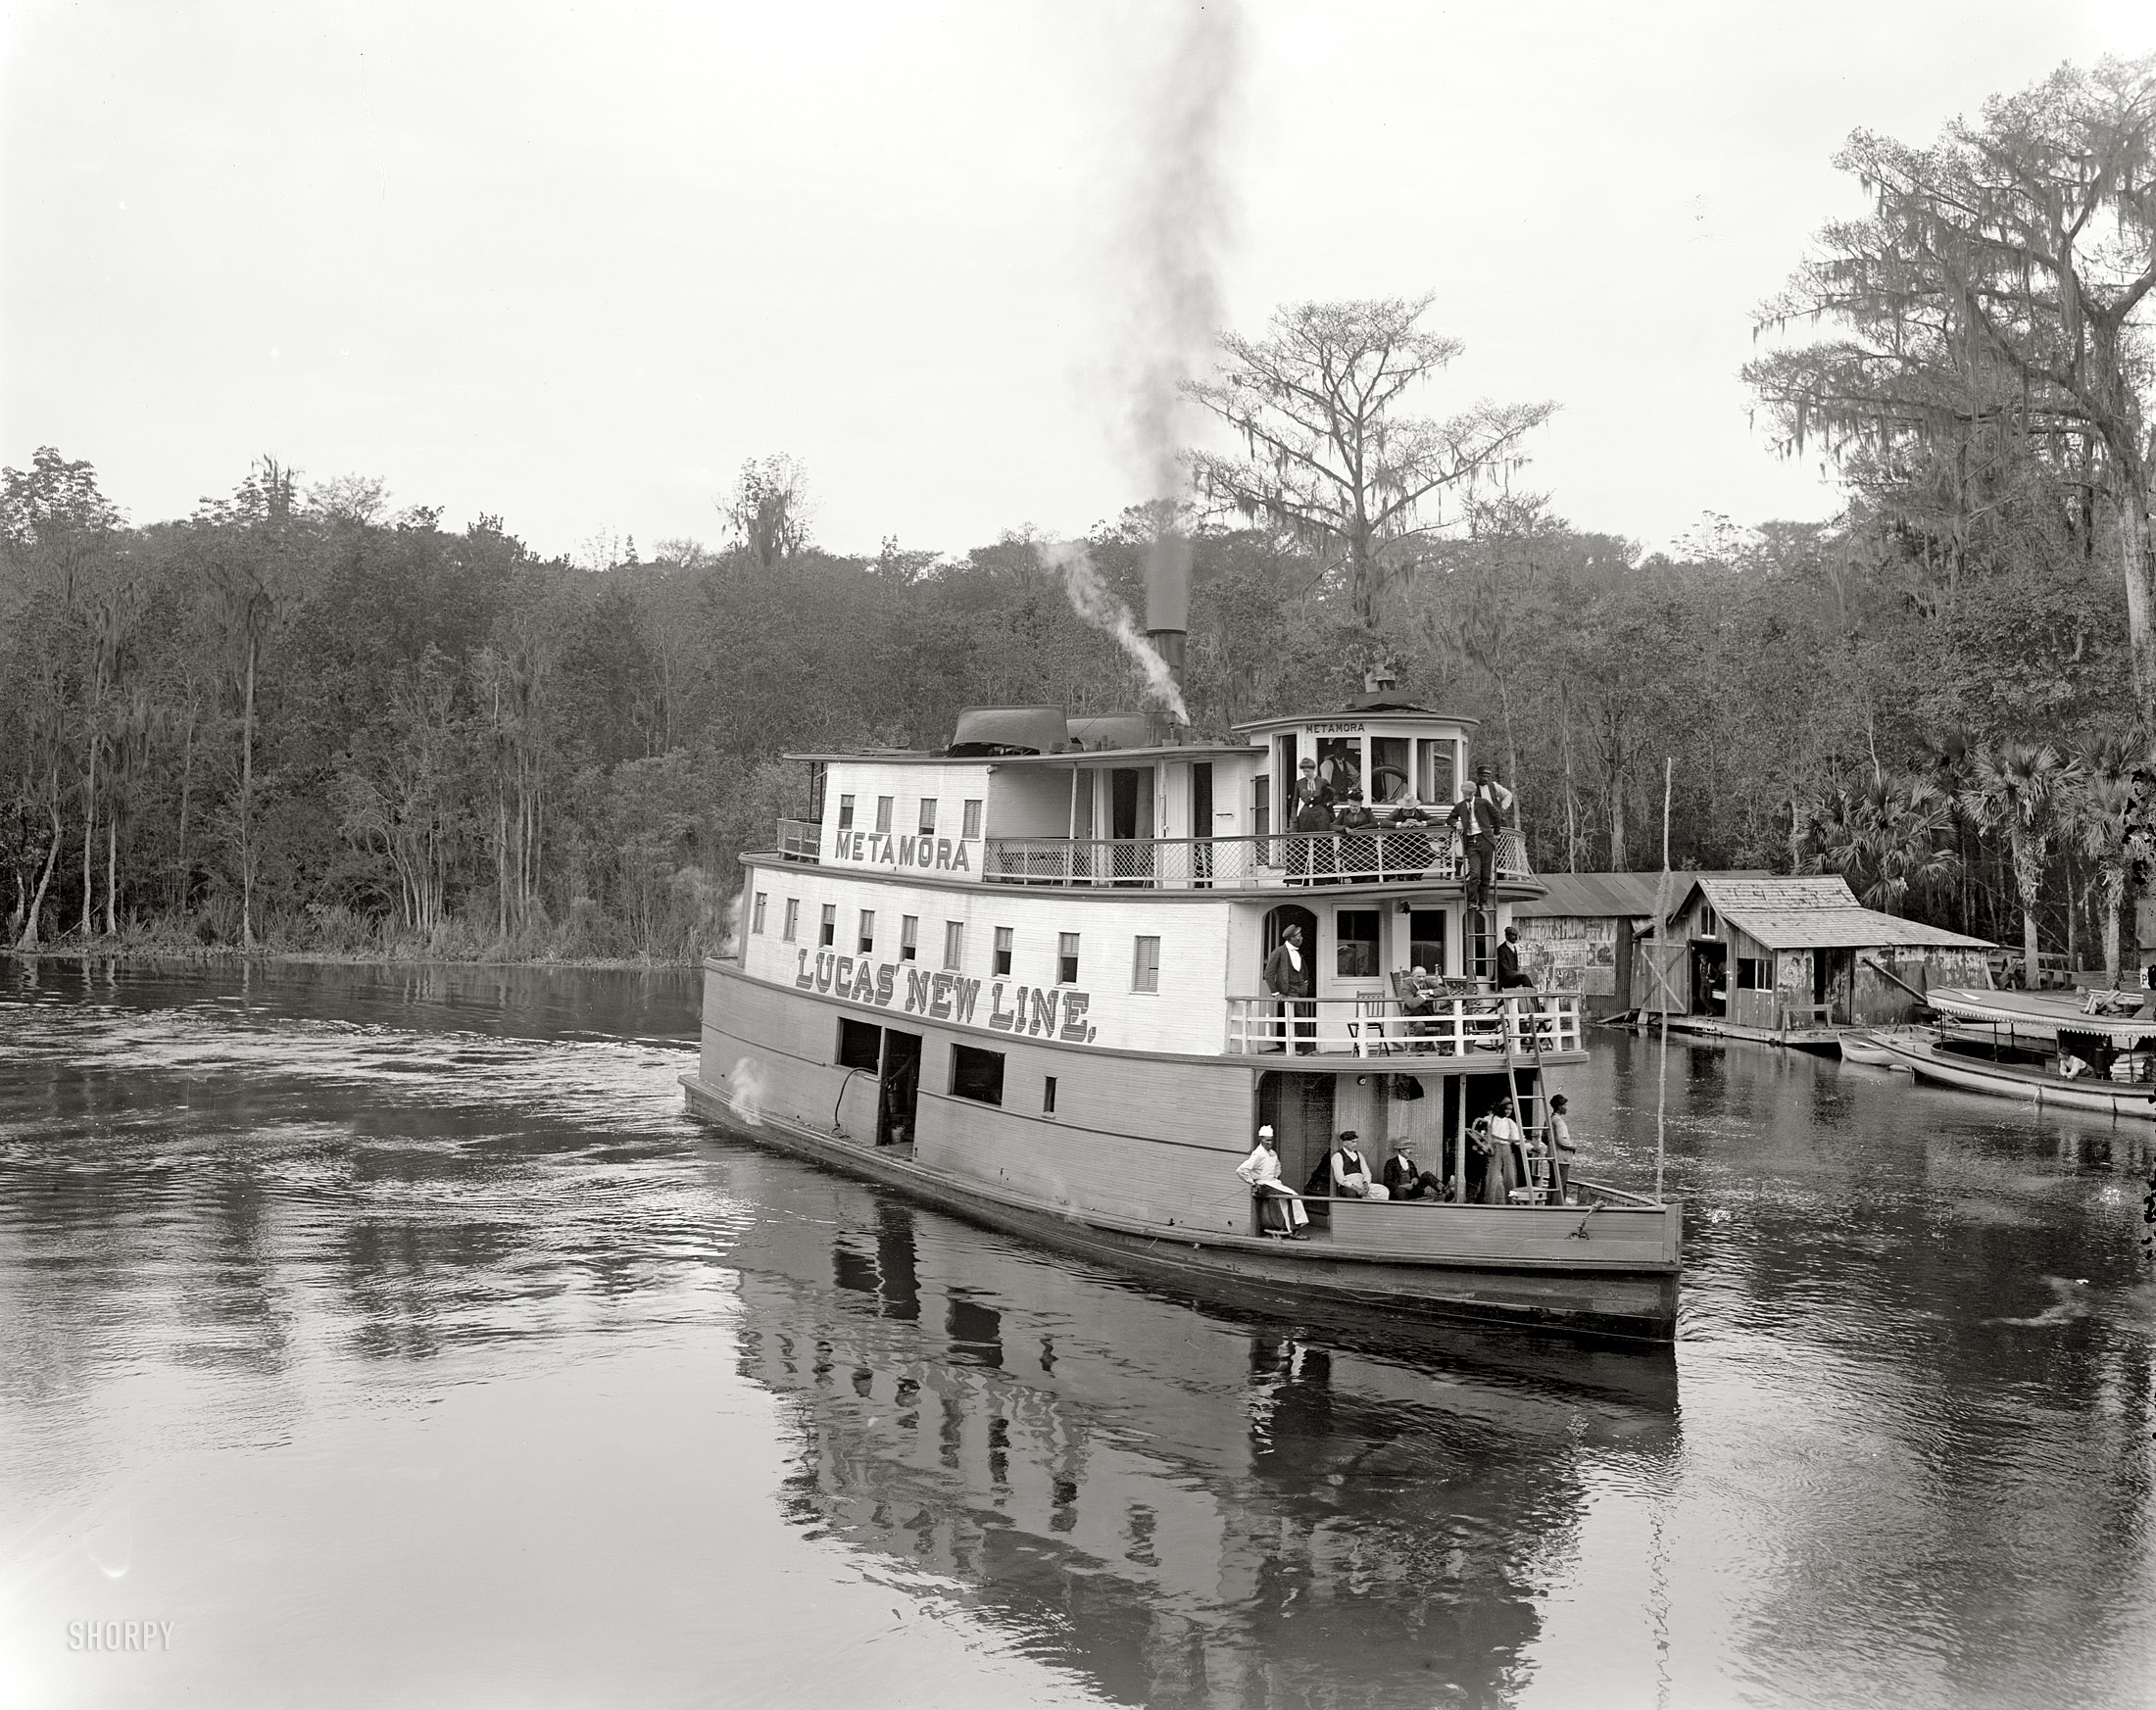 Florida circa 1902. "At Silver Springs on the Ocklawaha." Our second look at the river steamer Metamora of Palatka. 8x10 inch dry plate glass negative by William Henry Jackson, Detroit Publishing Company. View full size.